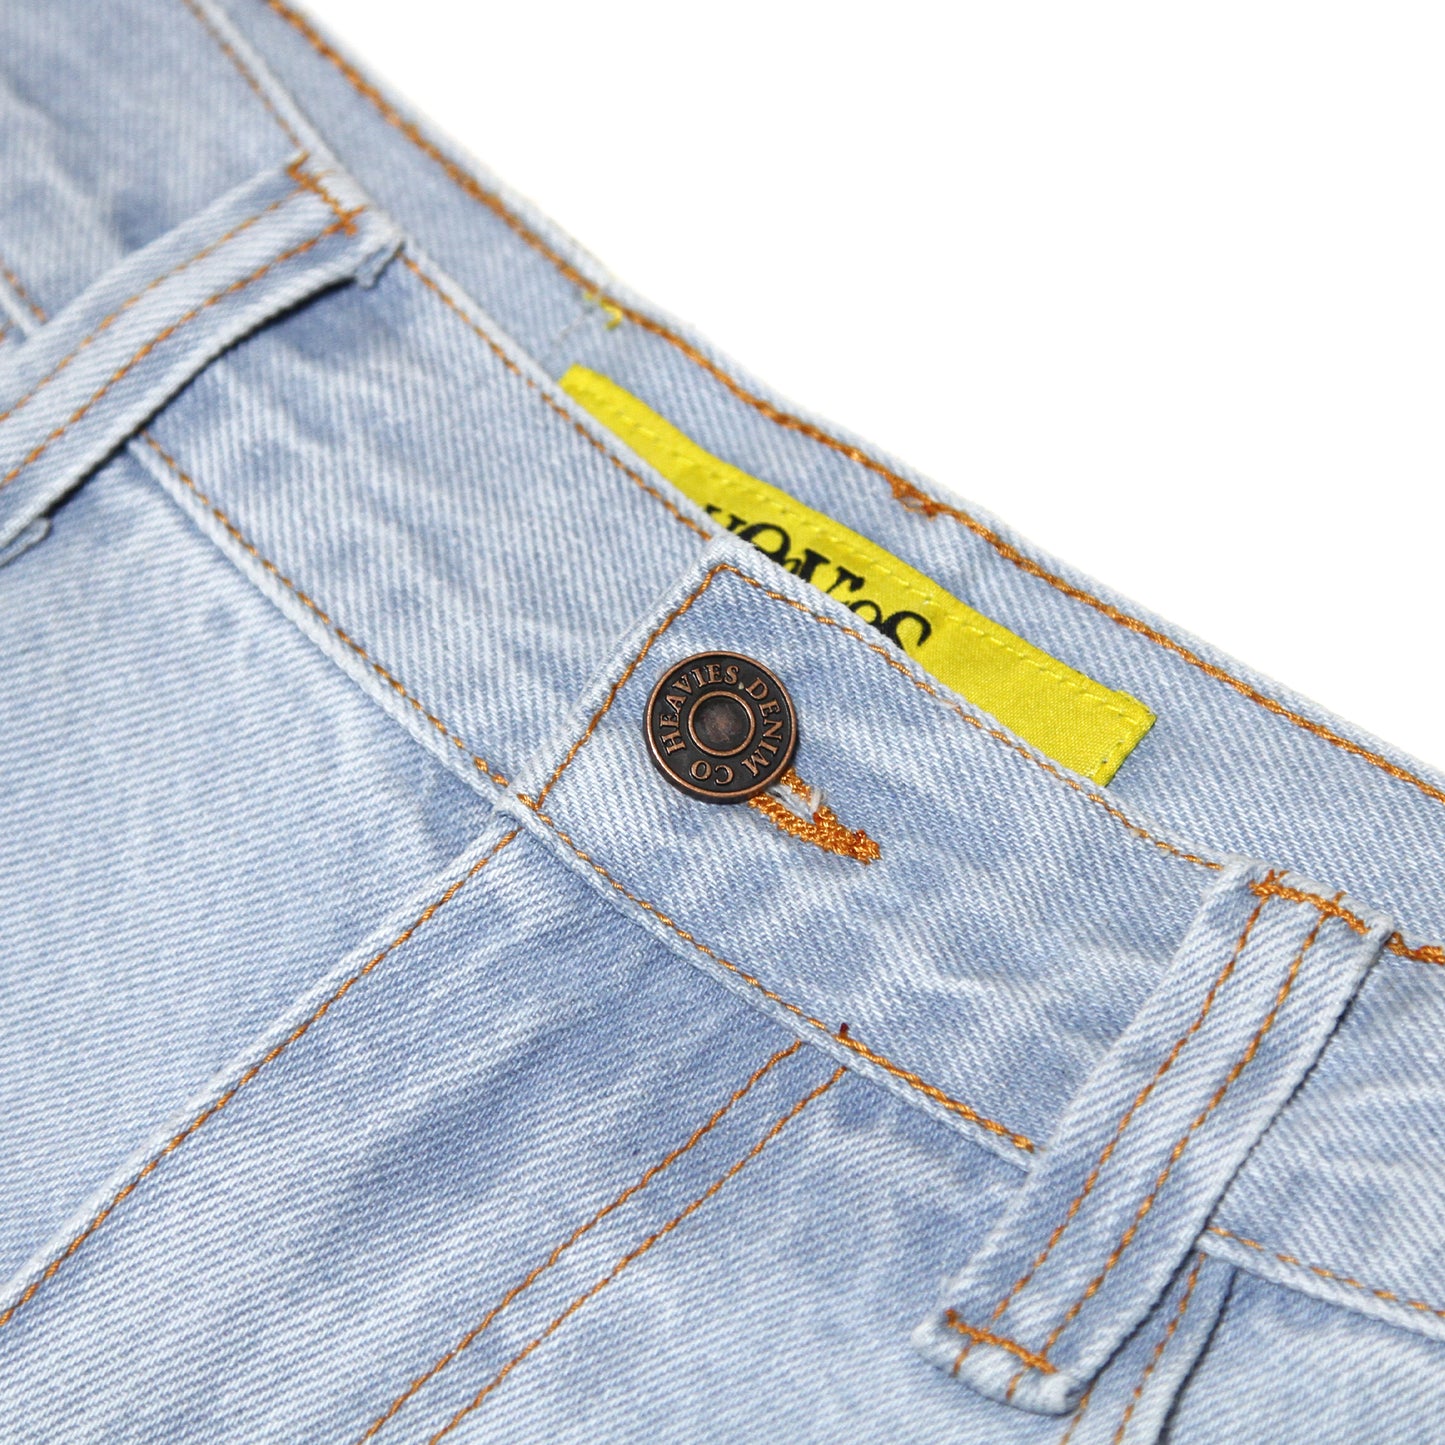 HEAVIES - 02 Jeans/Washed Light Blue